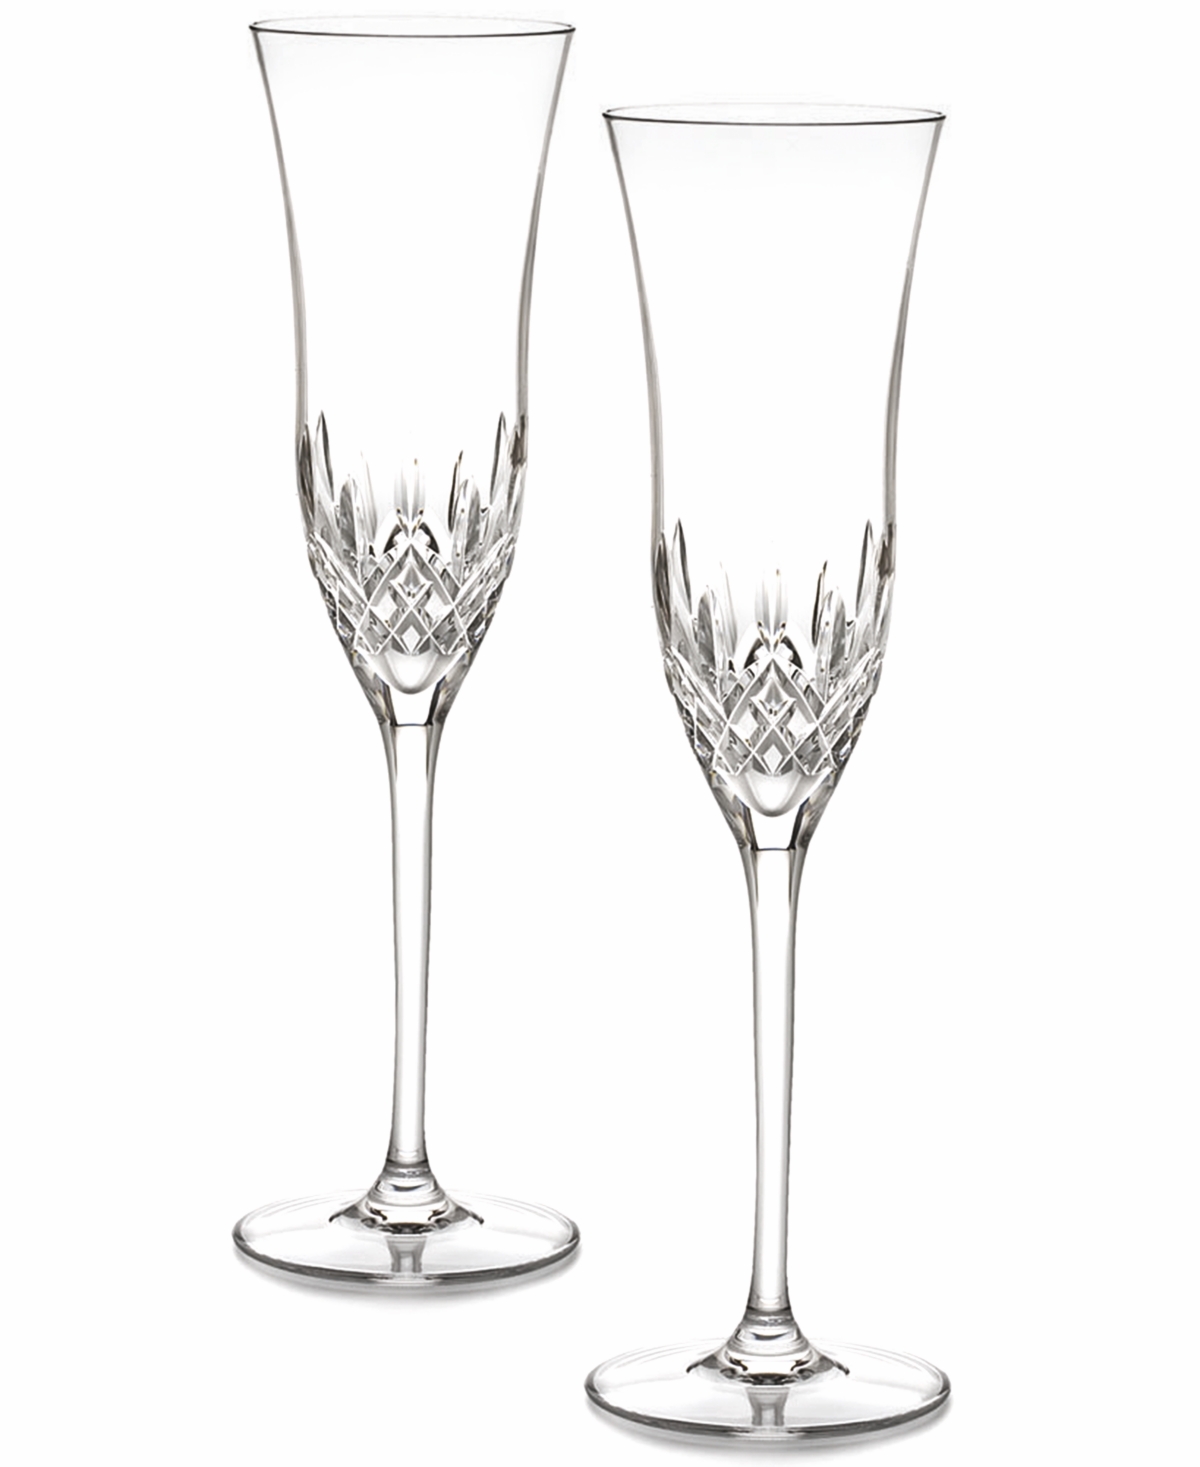 Waterford Stemware, Lismore Essence Toasting Flutes, Set Of 2 In Oxford